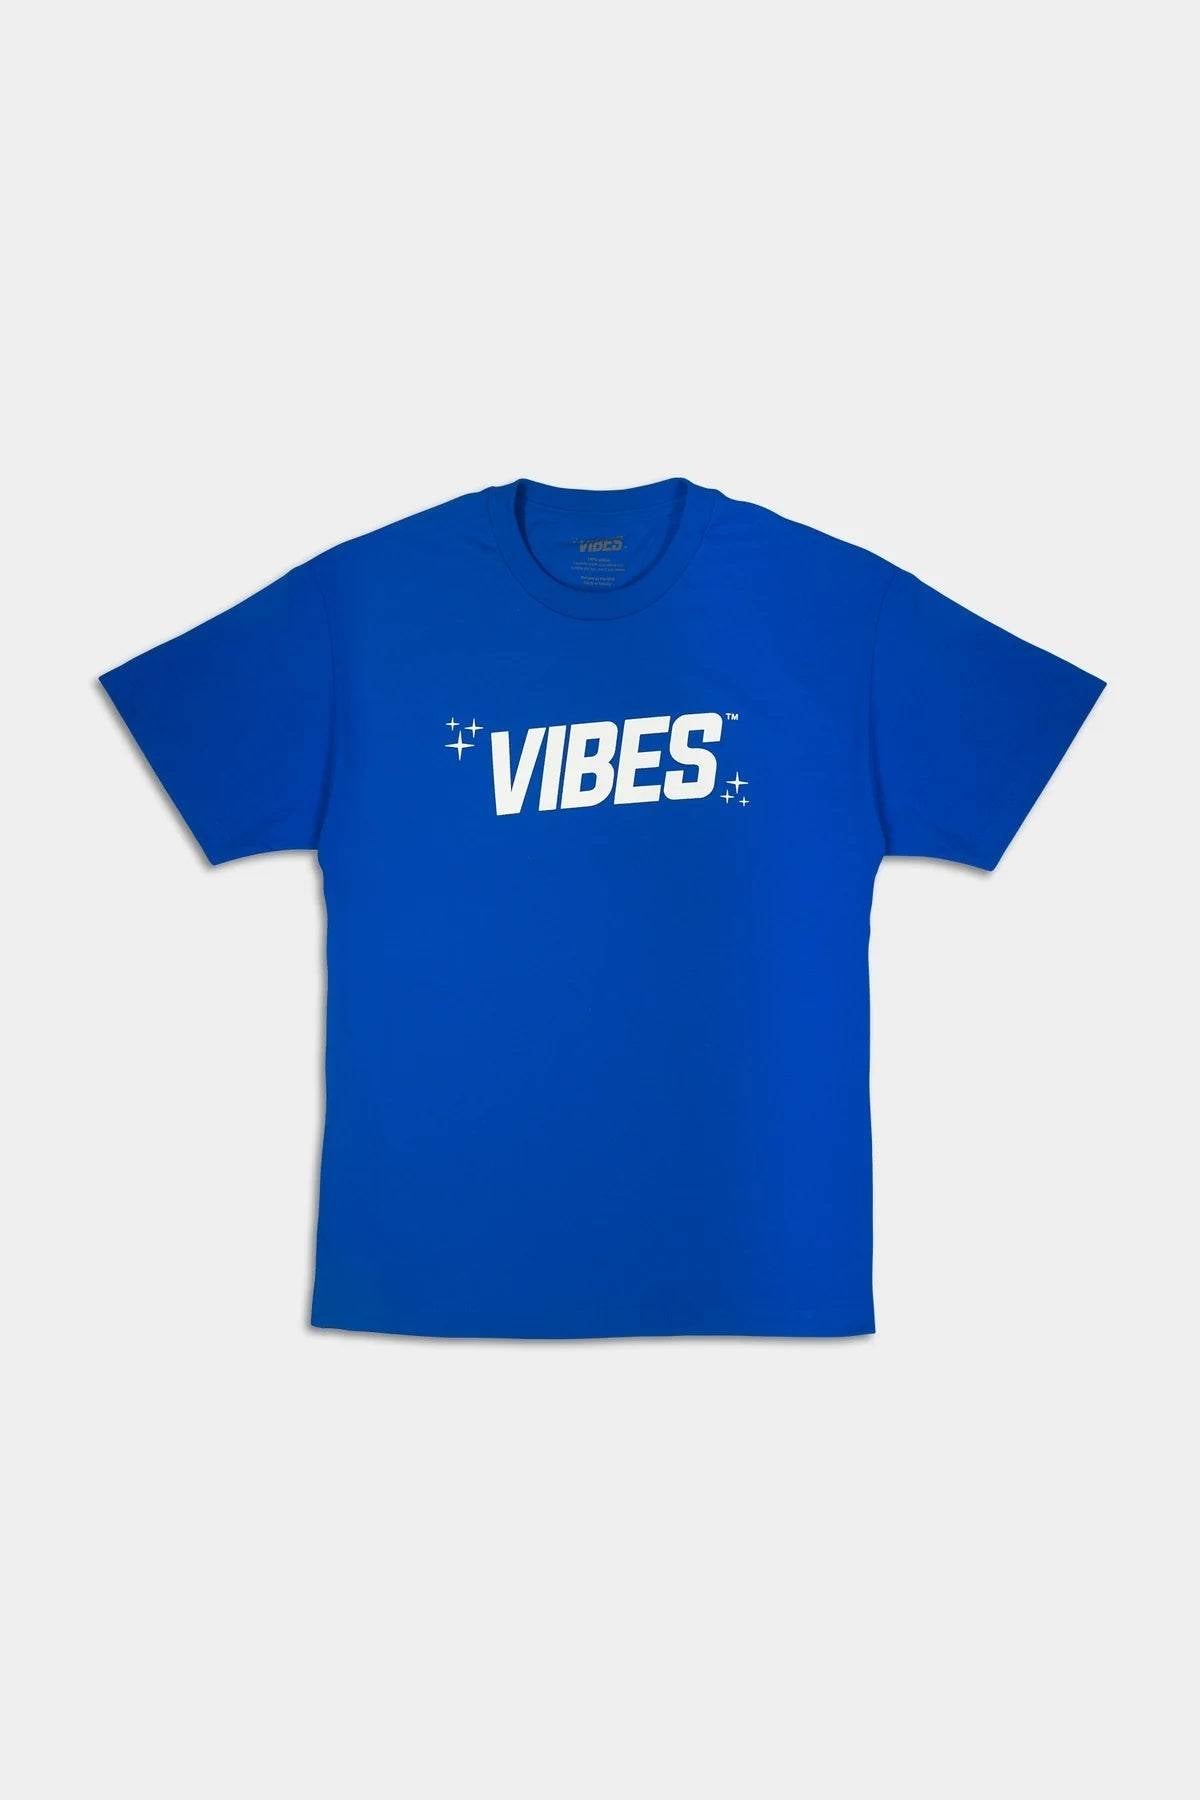 VIBES Blue With White Logo T-Shirt X-Large